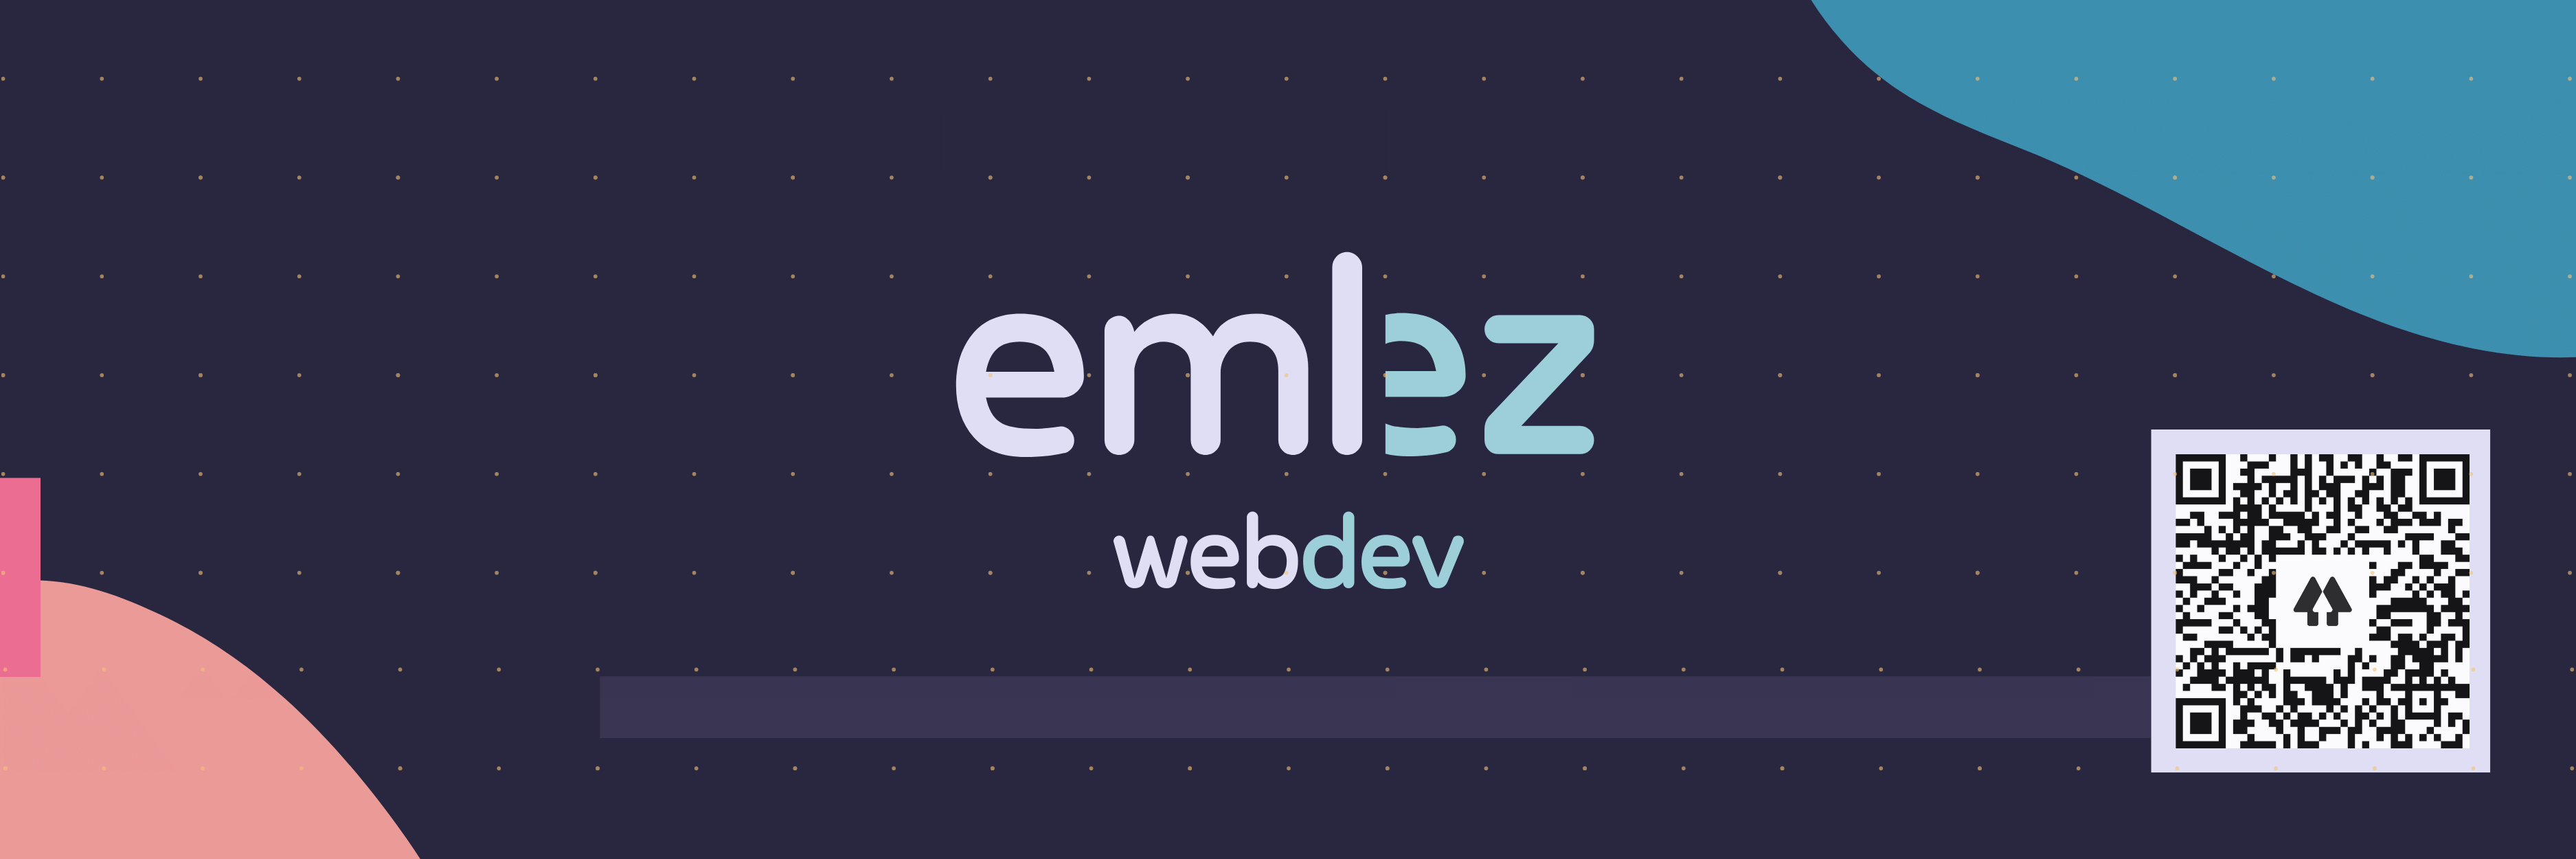 emlez.dev banner with QR code that redirects to Linktree.